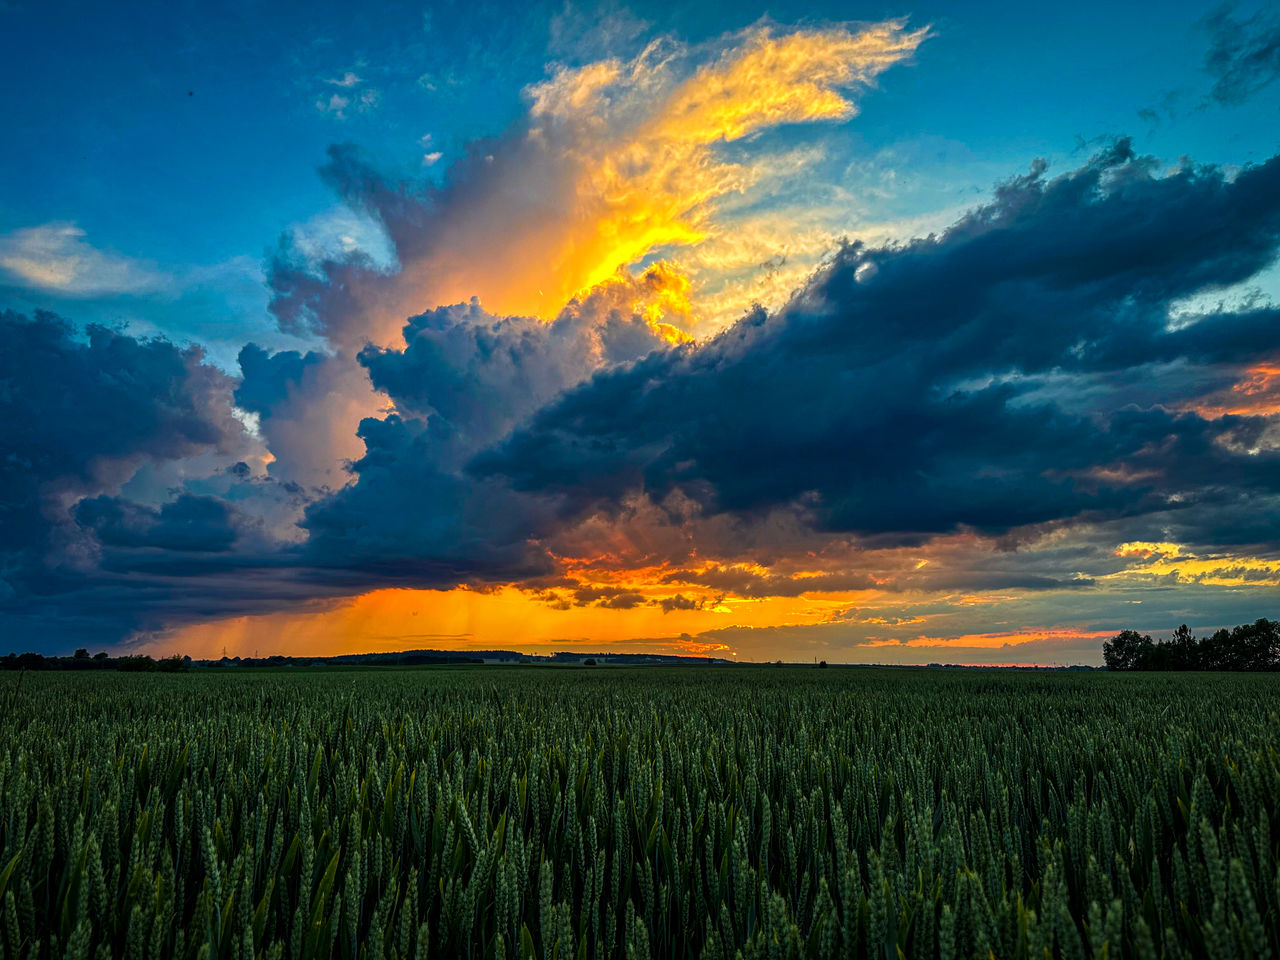 sky, landscape, environment, cloud, field, land, agriculture, horizon, plant, crop, rural scene, sunset, nature, beauty in nature, scenics - nature, cereal plant, plain, blue, barley, dramatic sky, growth, dawn, no people, farm, summer, sunlight, horizon over land, food, tranquility, prairie, grassland, outdoors, urban skyline, multi colored, sun, tranquil scene, cloudscape, vibrant color, social issues, food and drink, grass, idyllic, environmental conservation, tree, yellow, sunbeam, twilight, orange color, red, green, meadow, back lit, freshness, gold, travel, abundance, rural area, non-urban scene, moody sky, corn